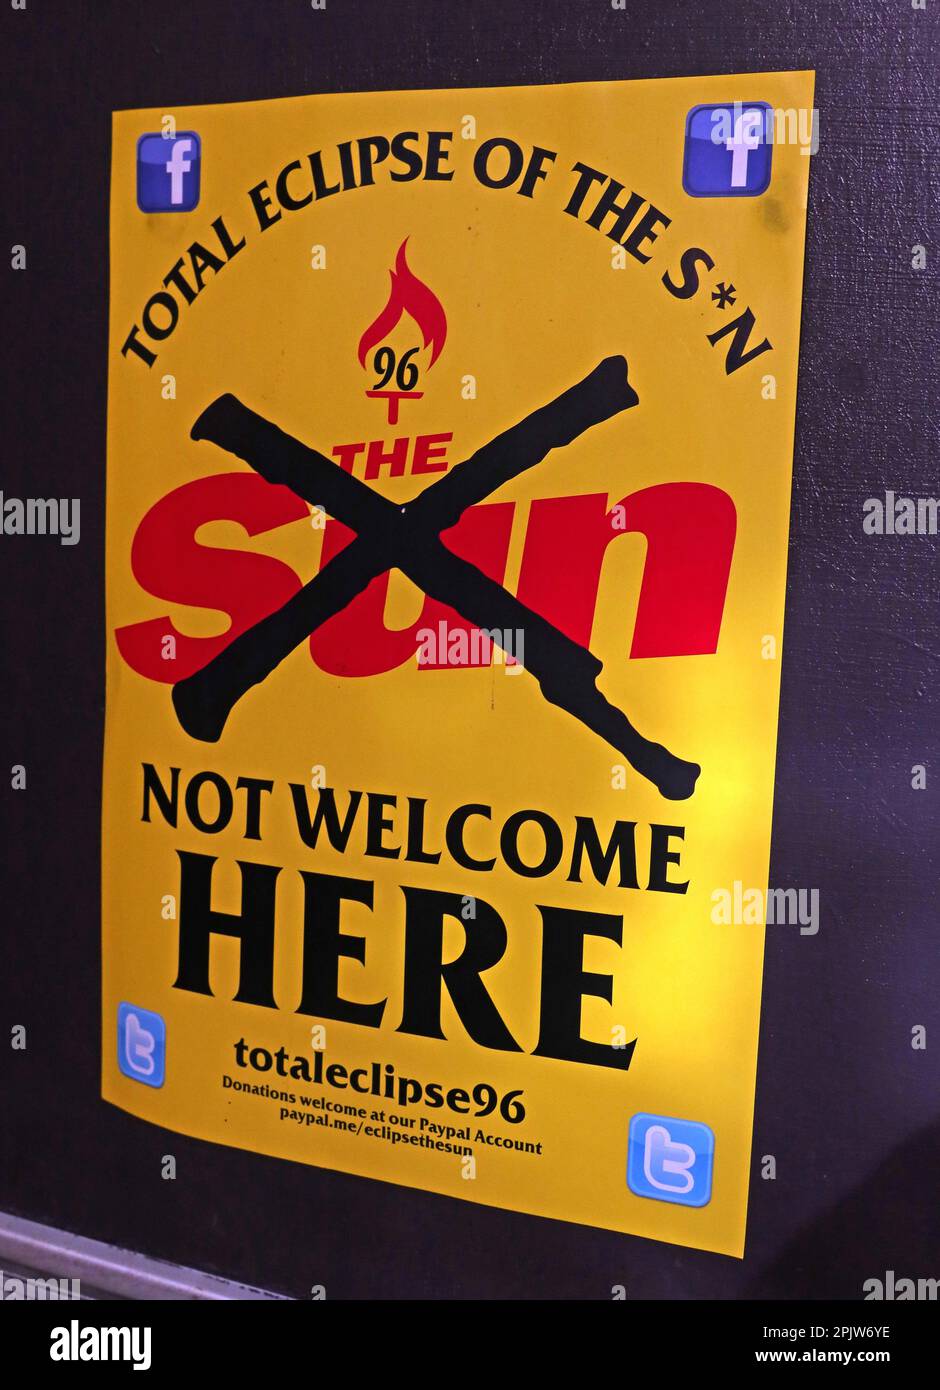 The Sun newspaper, News Group Newspapers, not welcome in Liverpool or Merseyside after 1989 Hillsborough disaster lies and insults Stock Photo